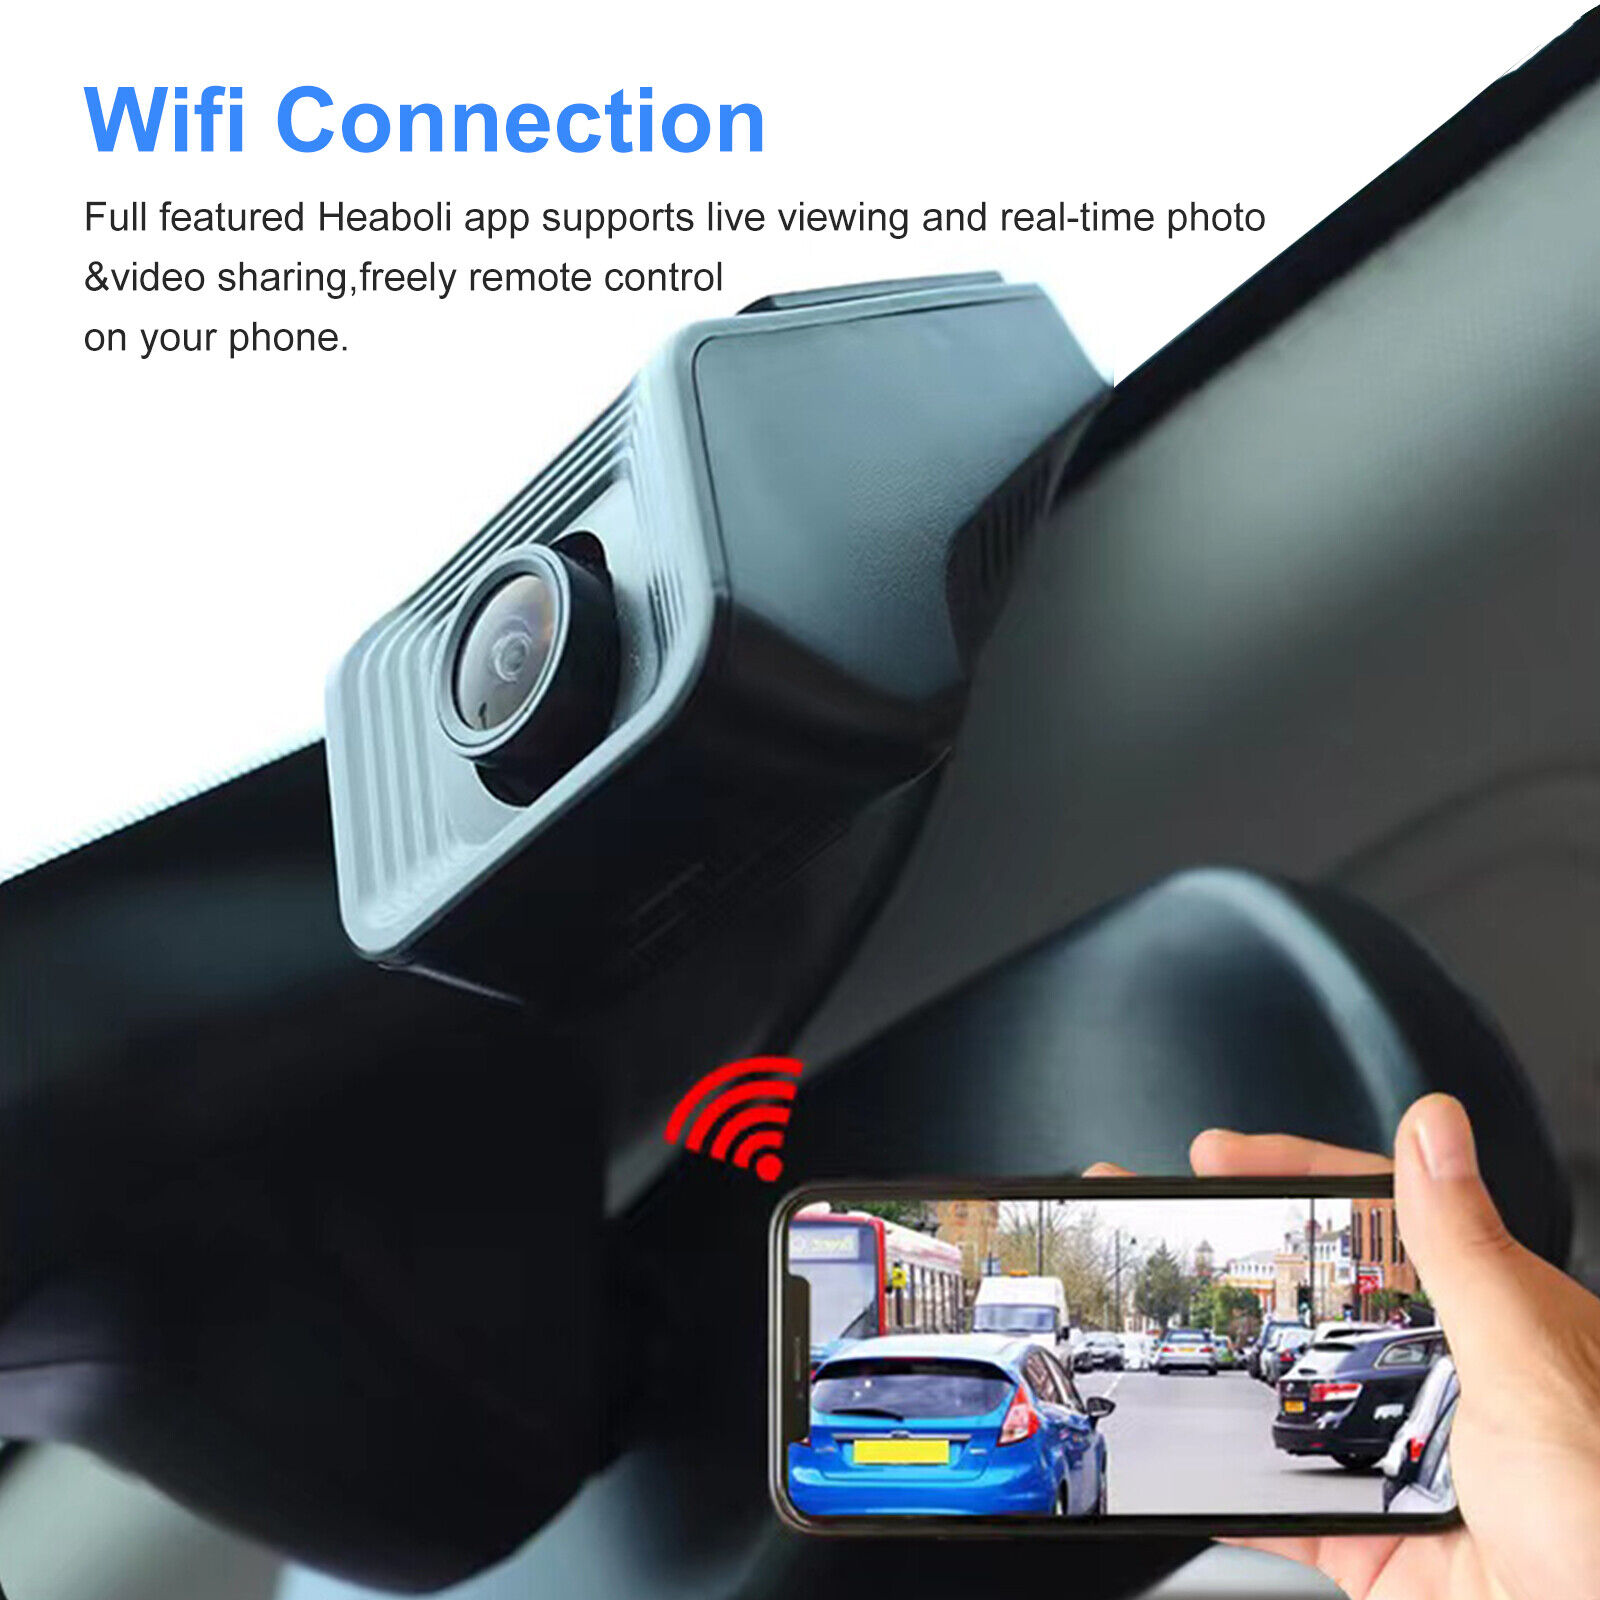 Rove R2-4K Dash Cam for Car - Built-in WiFi GPS Car Dashboard Camera  Recorder with UHD 2160P, 2.4 LCD Display, 150° Wide Angle, WDR, Night  Vision